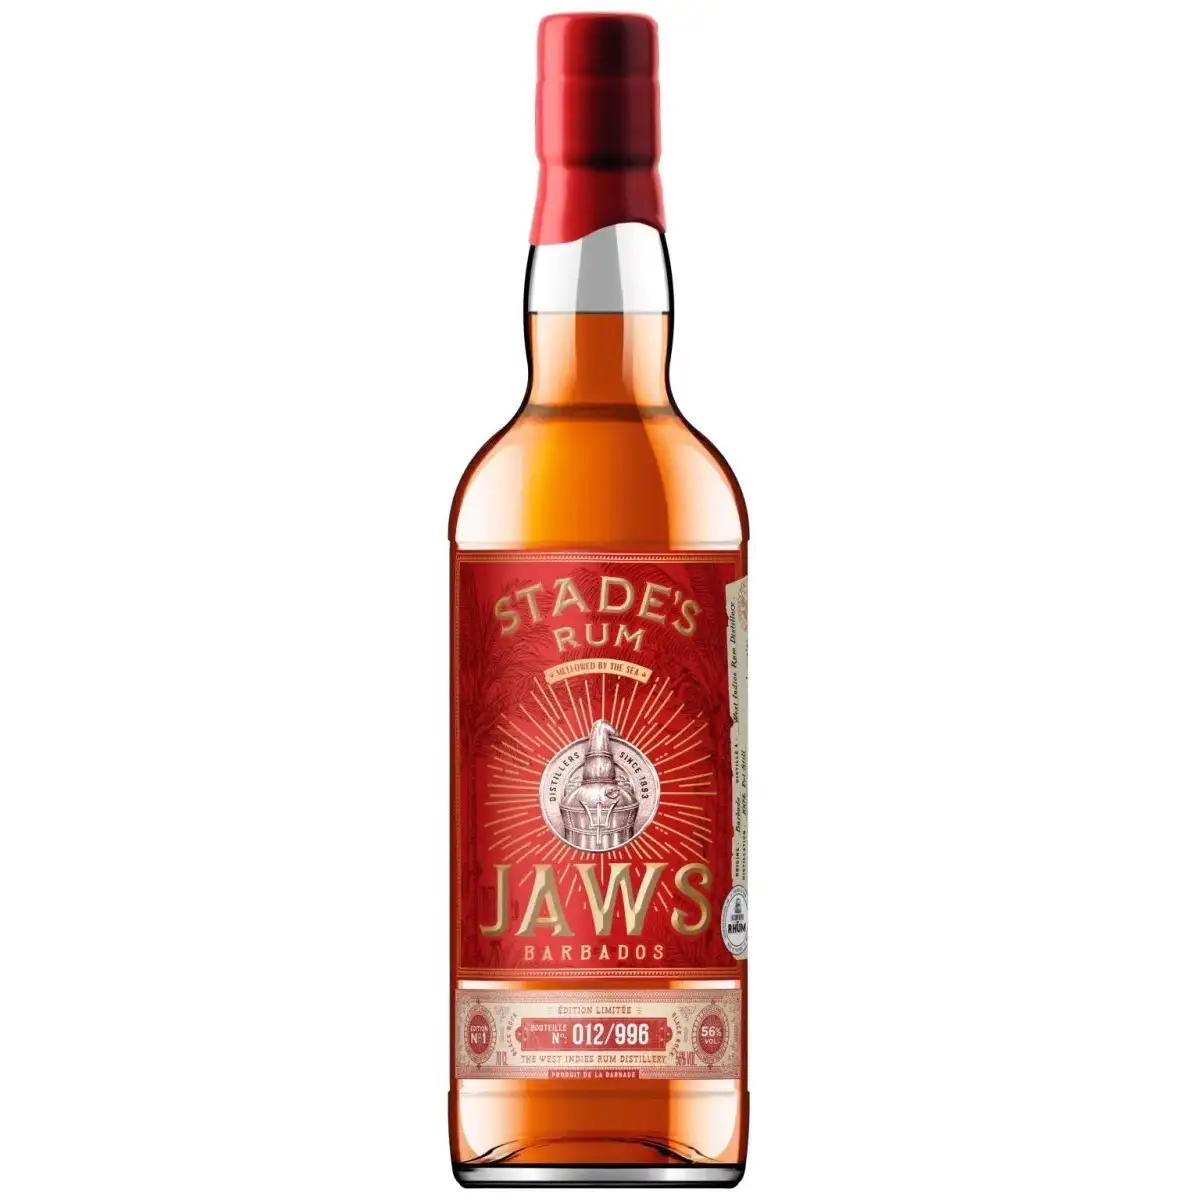 Image of the front of the bottle of the rum Stade’s Rum JAWS Barbados